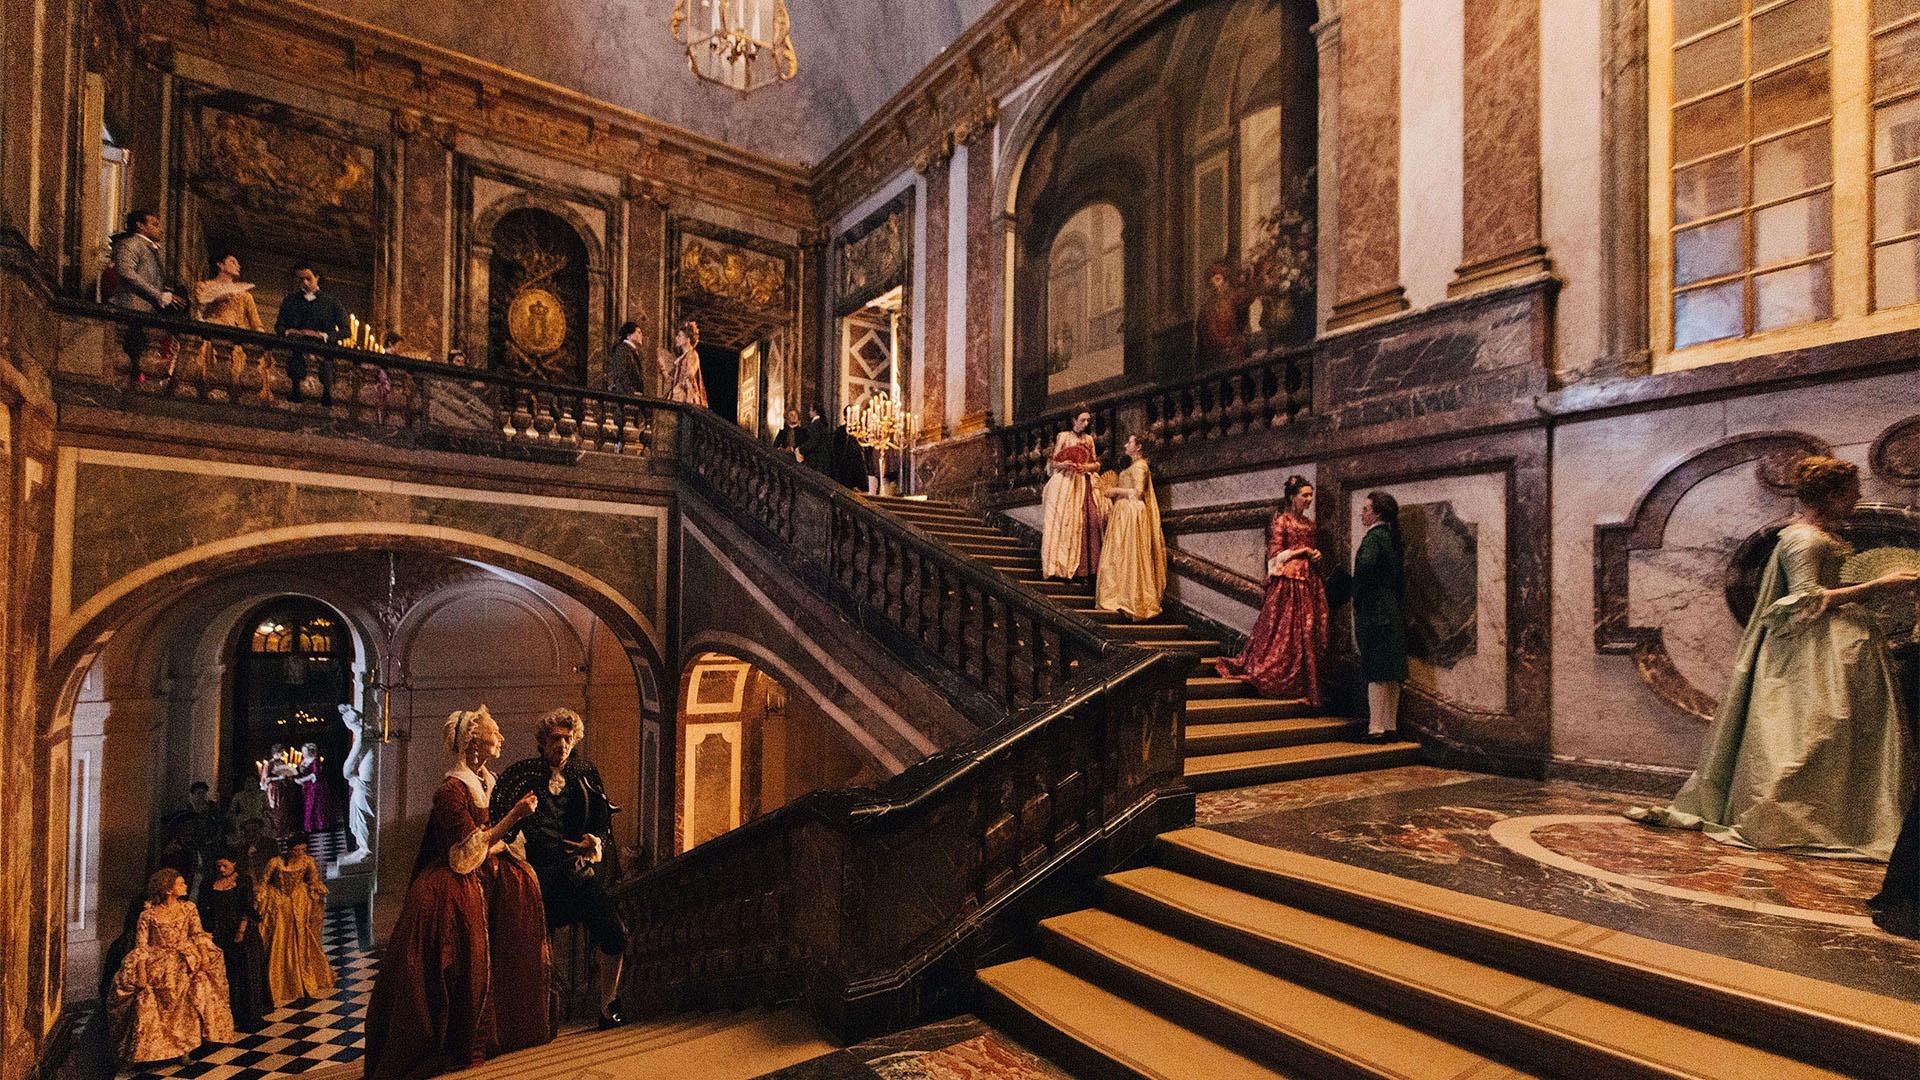 Image of members of the Court walking through the Palace of Versailles.